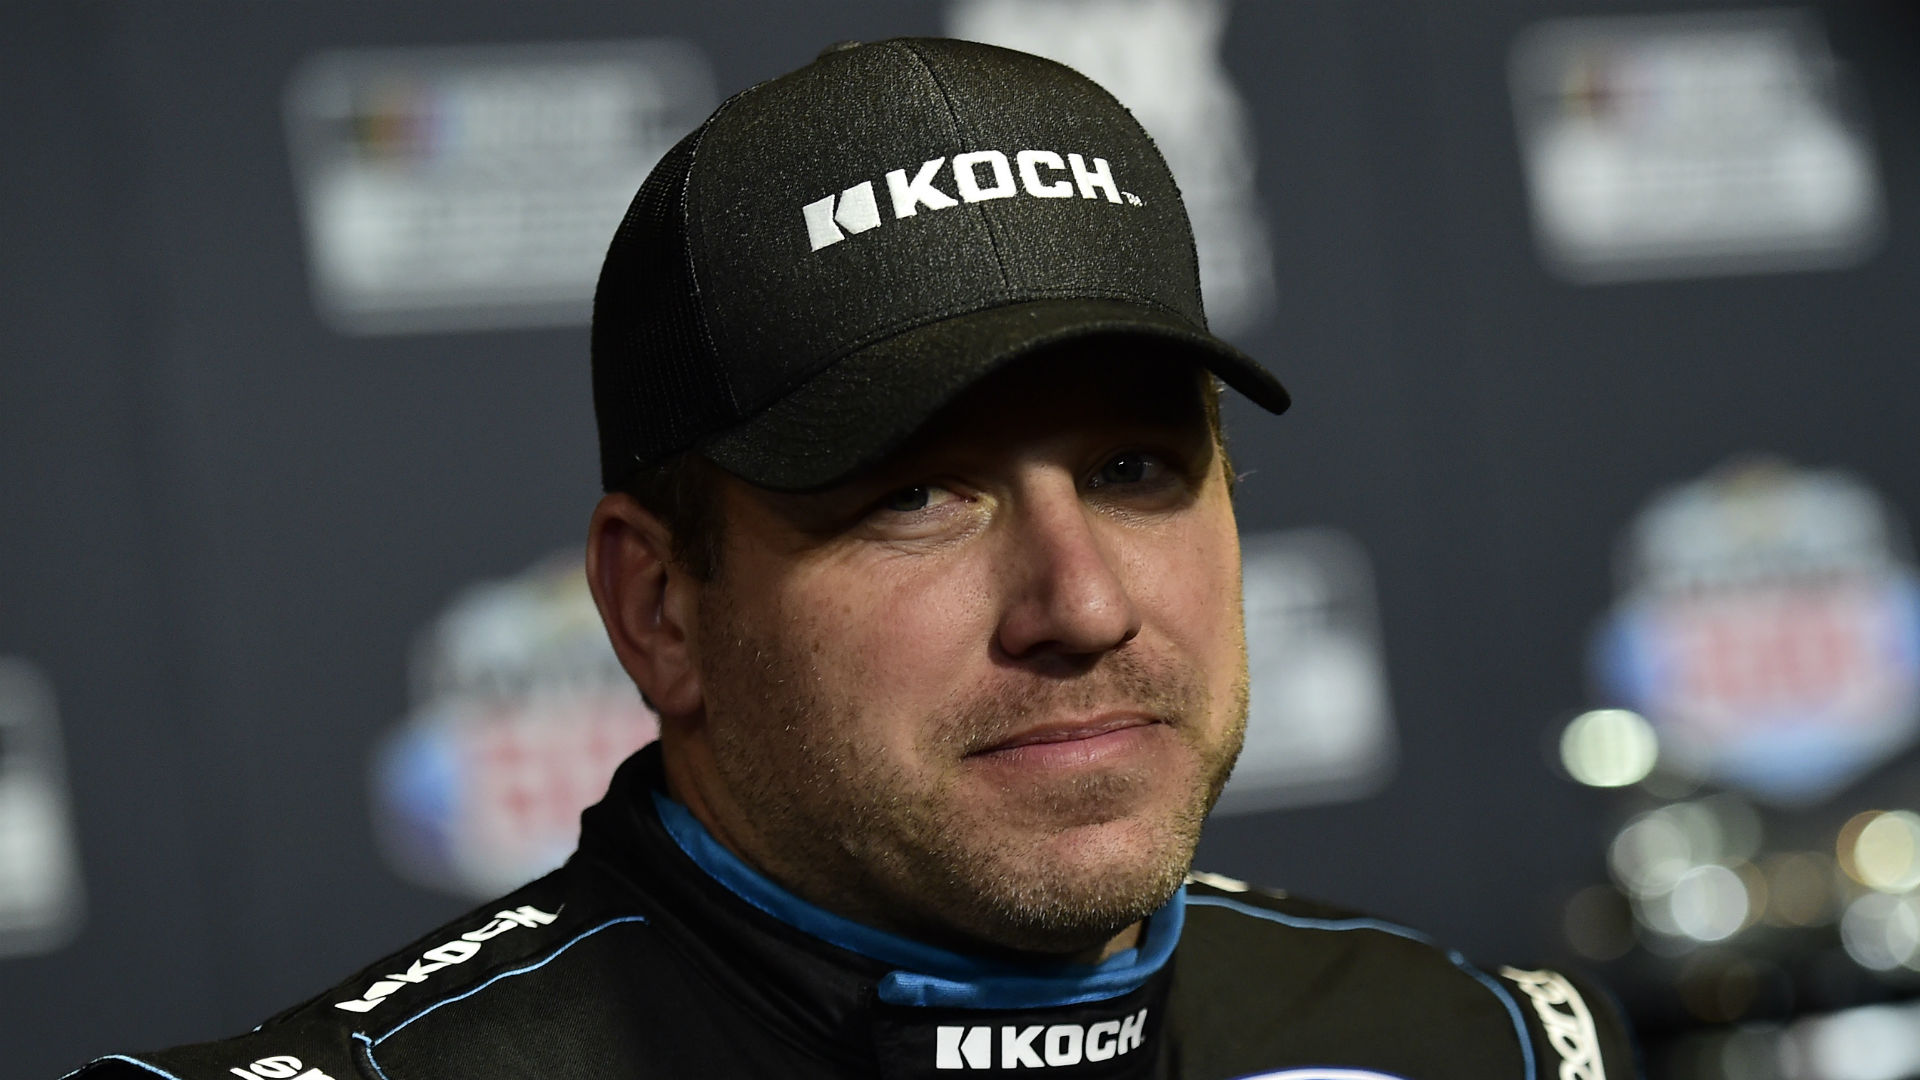 Roush Fenway Racing driver Ryan Newman walked out of Halifax Medical Center just two days after his horrific crash.